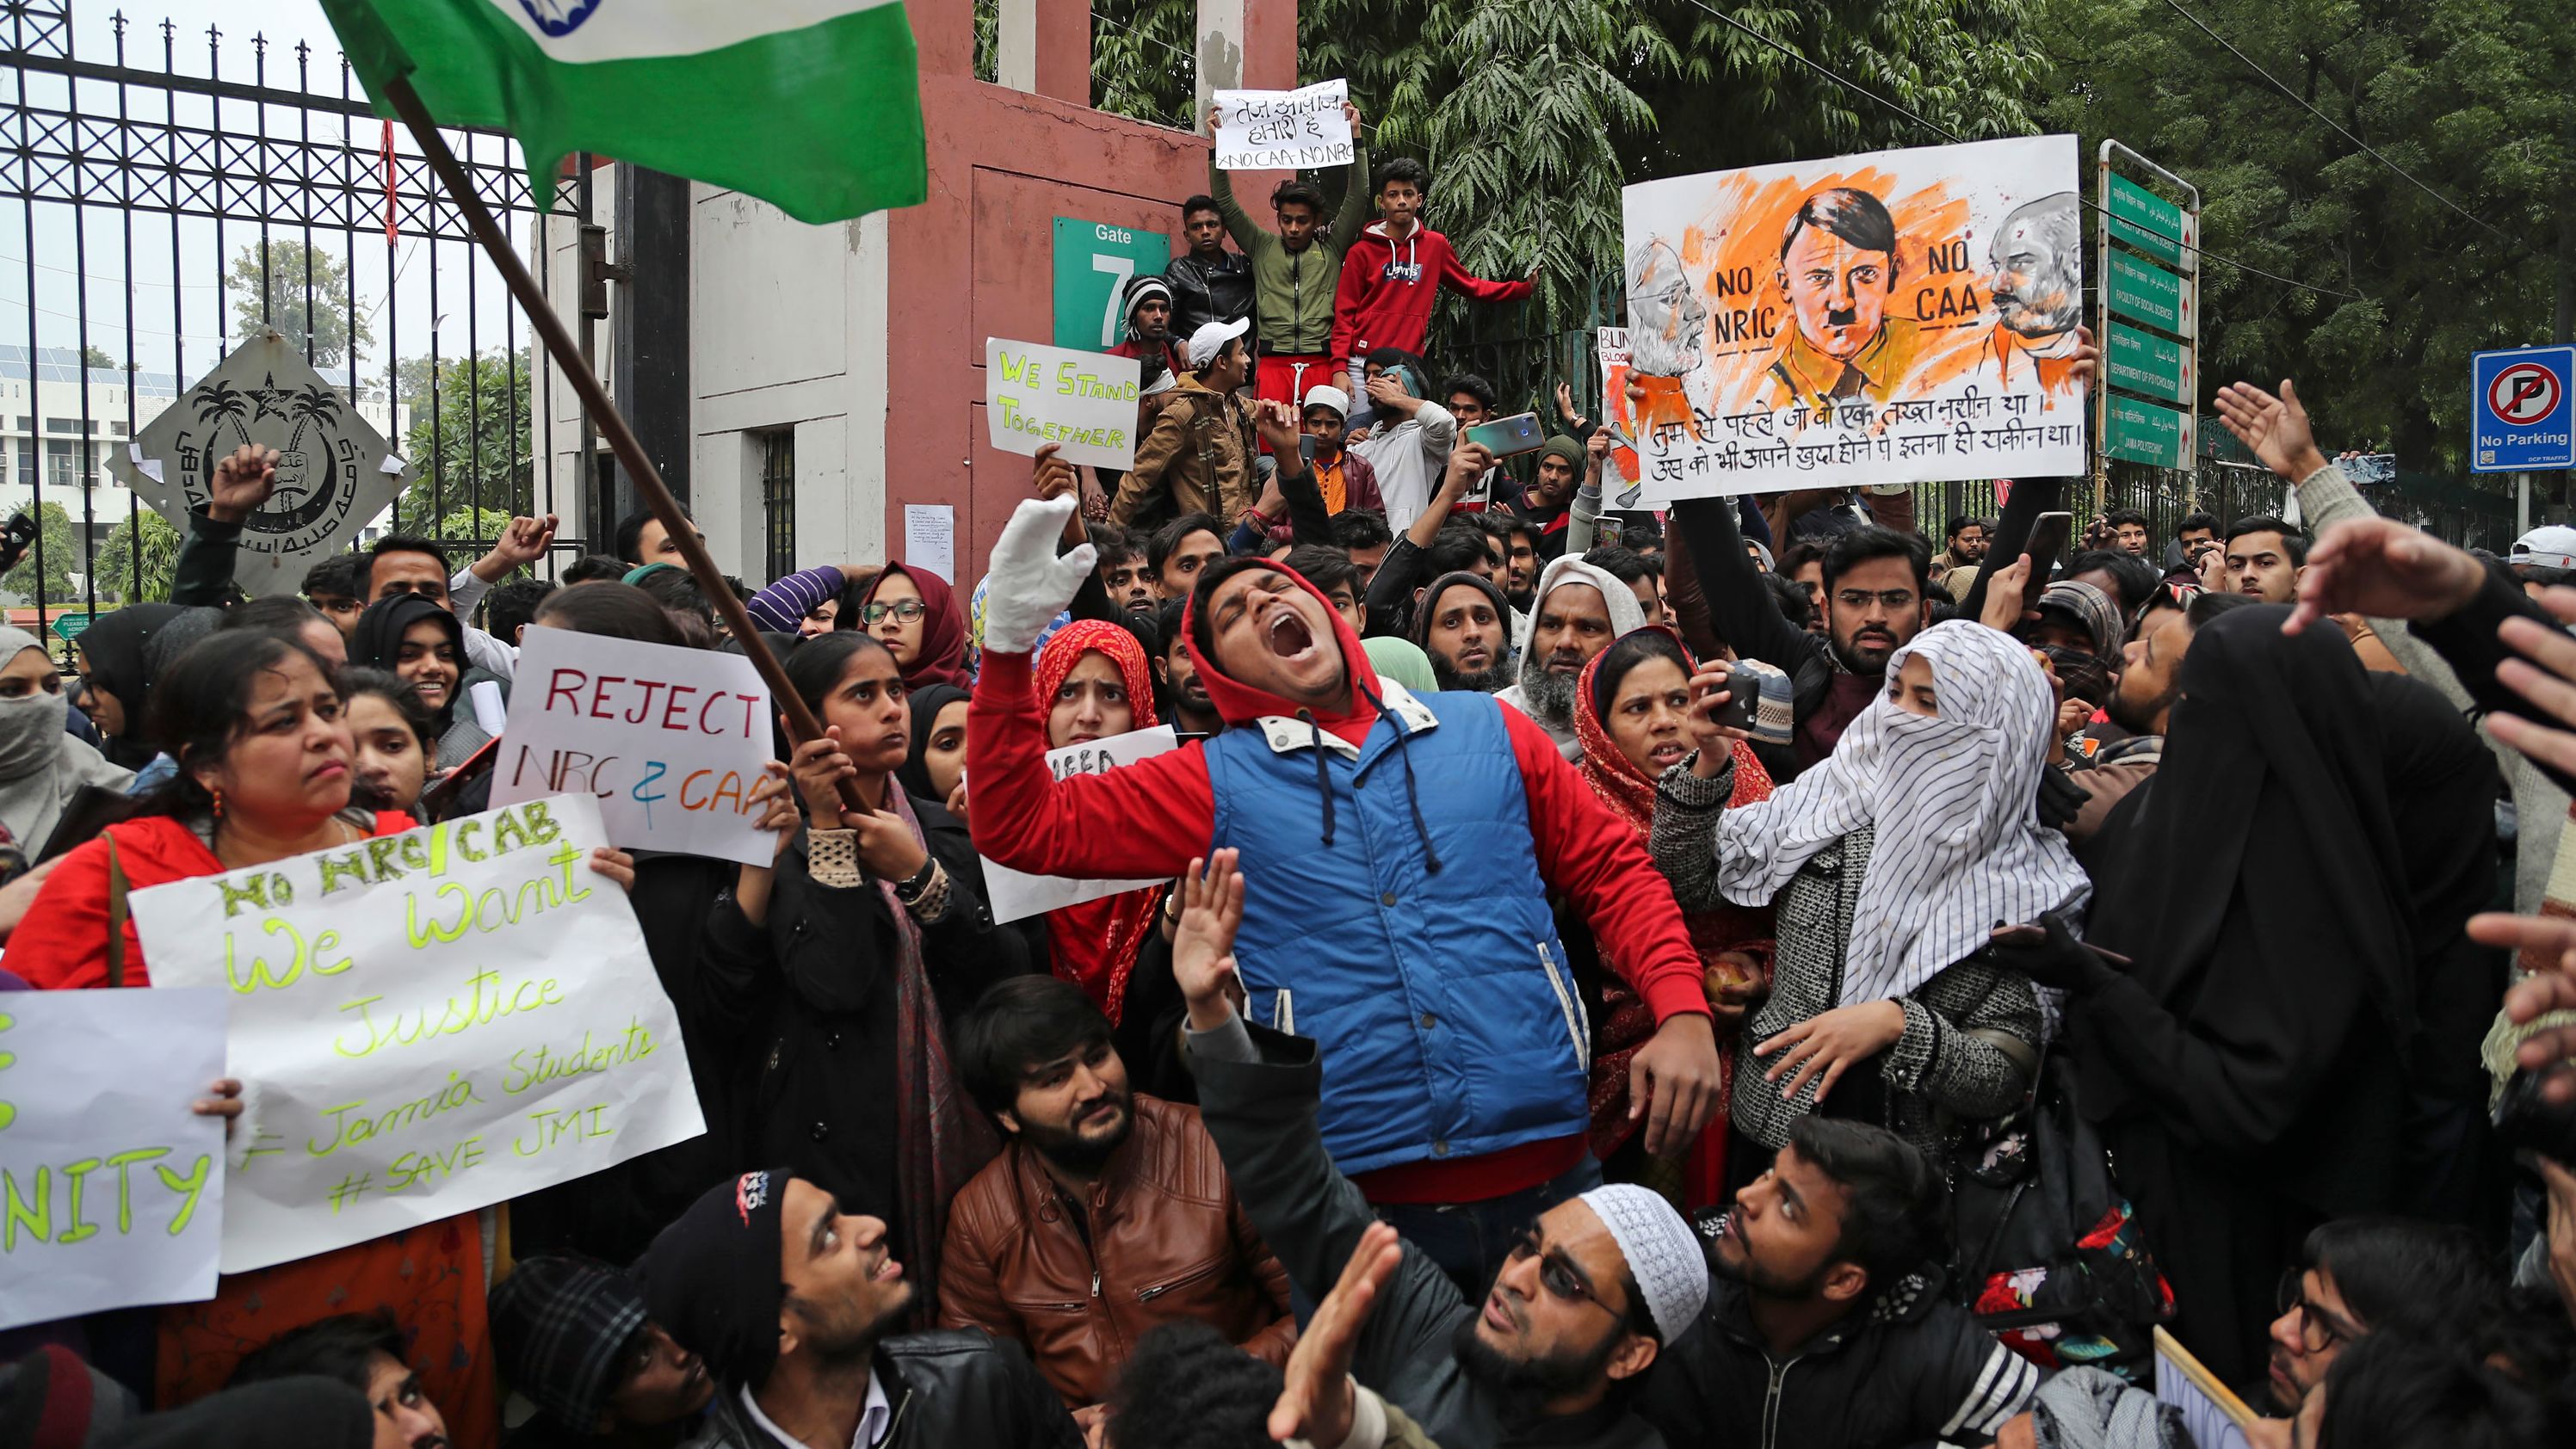 Students from Jamia Millia Islamia, a university in New Delhi, shout slogans during a protest on Tuesday, December 17.